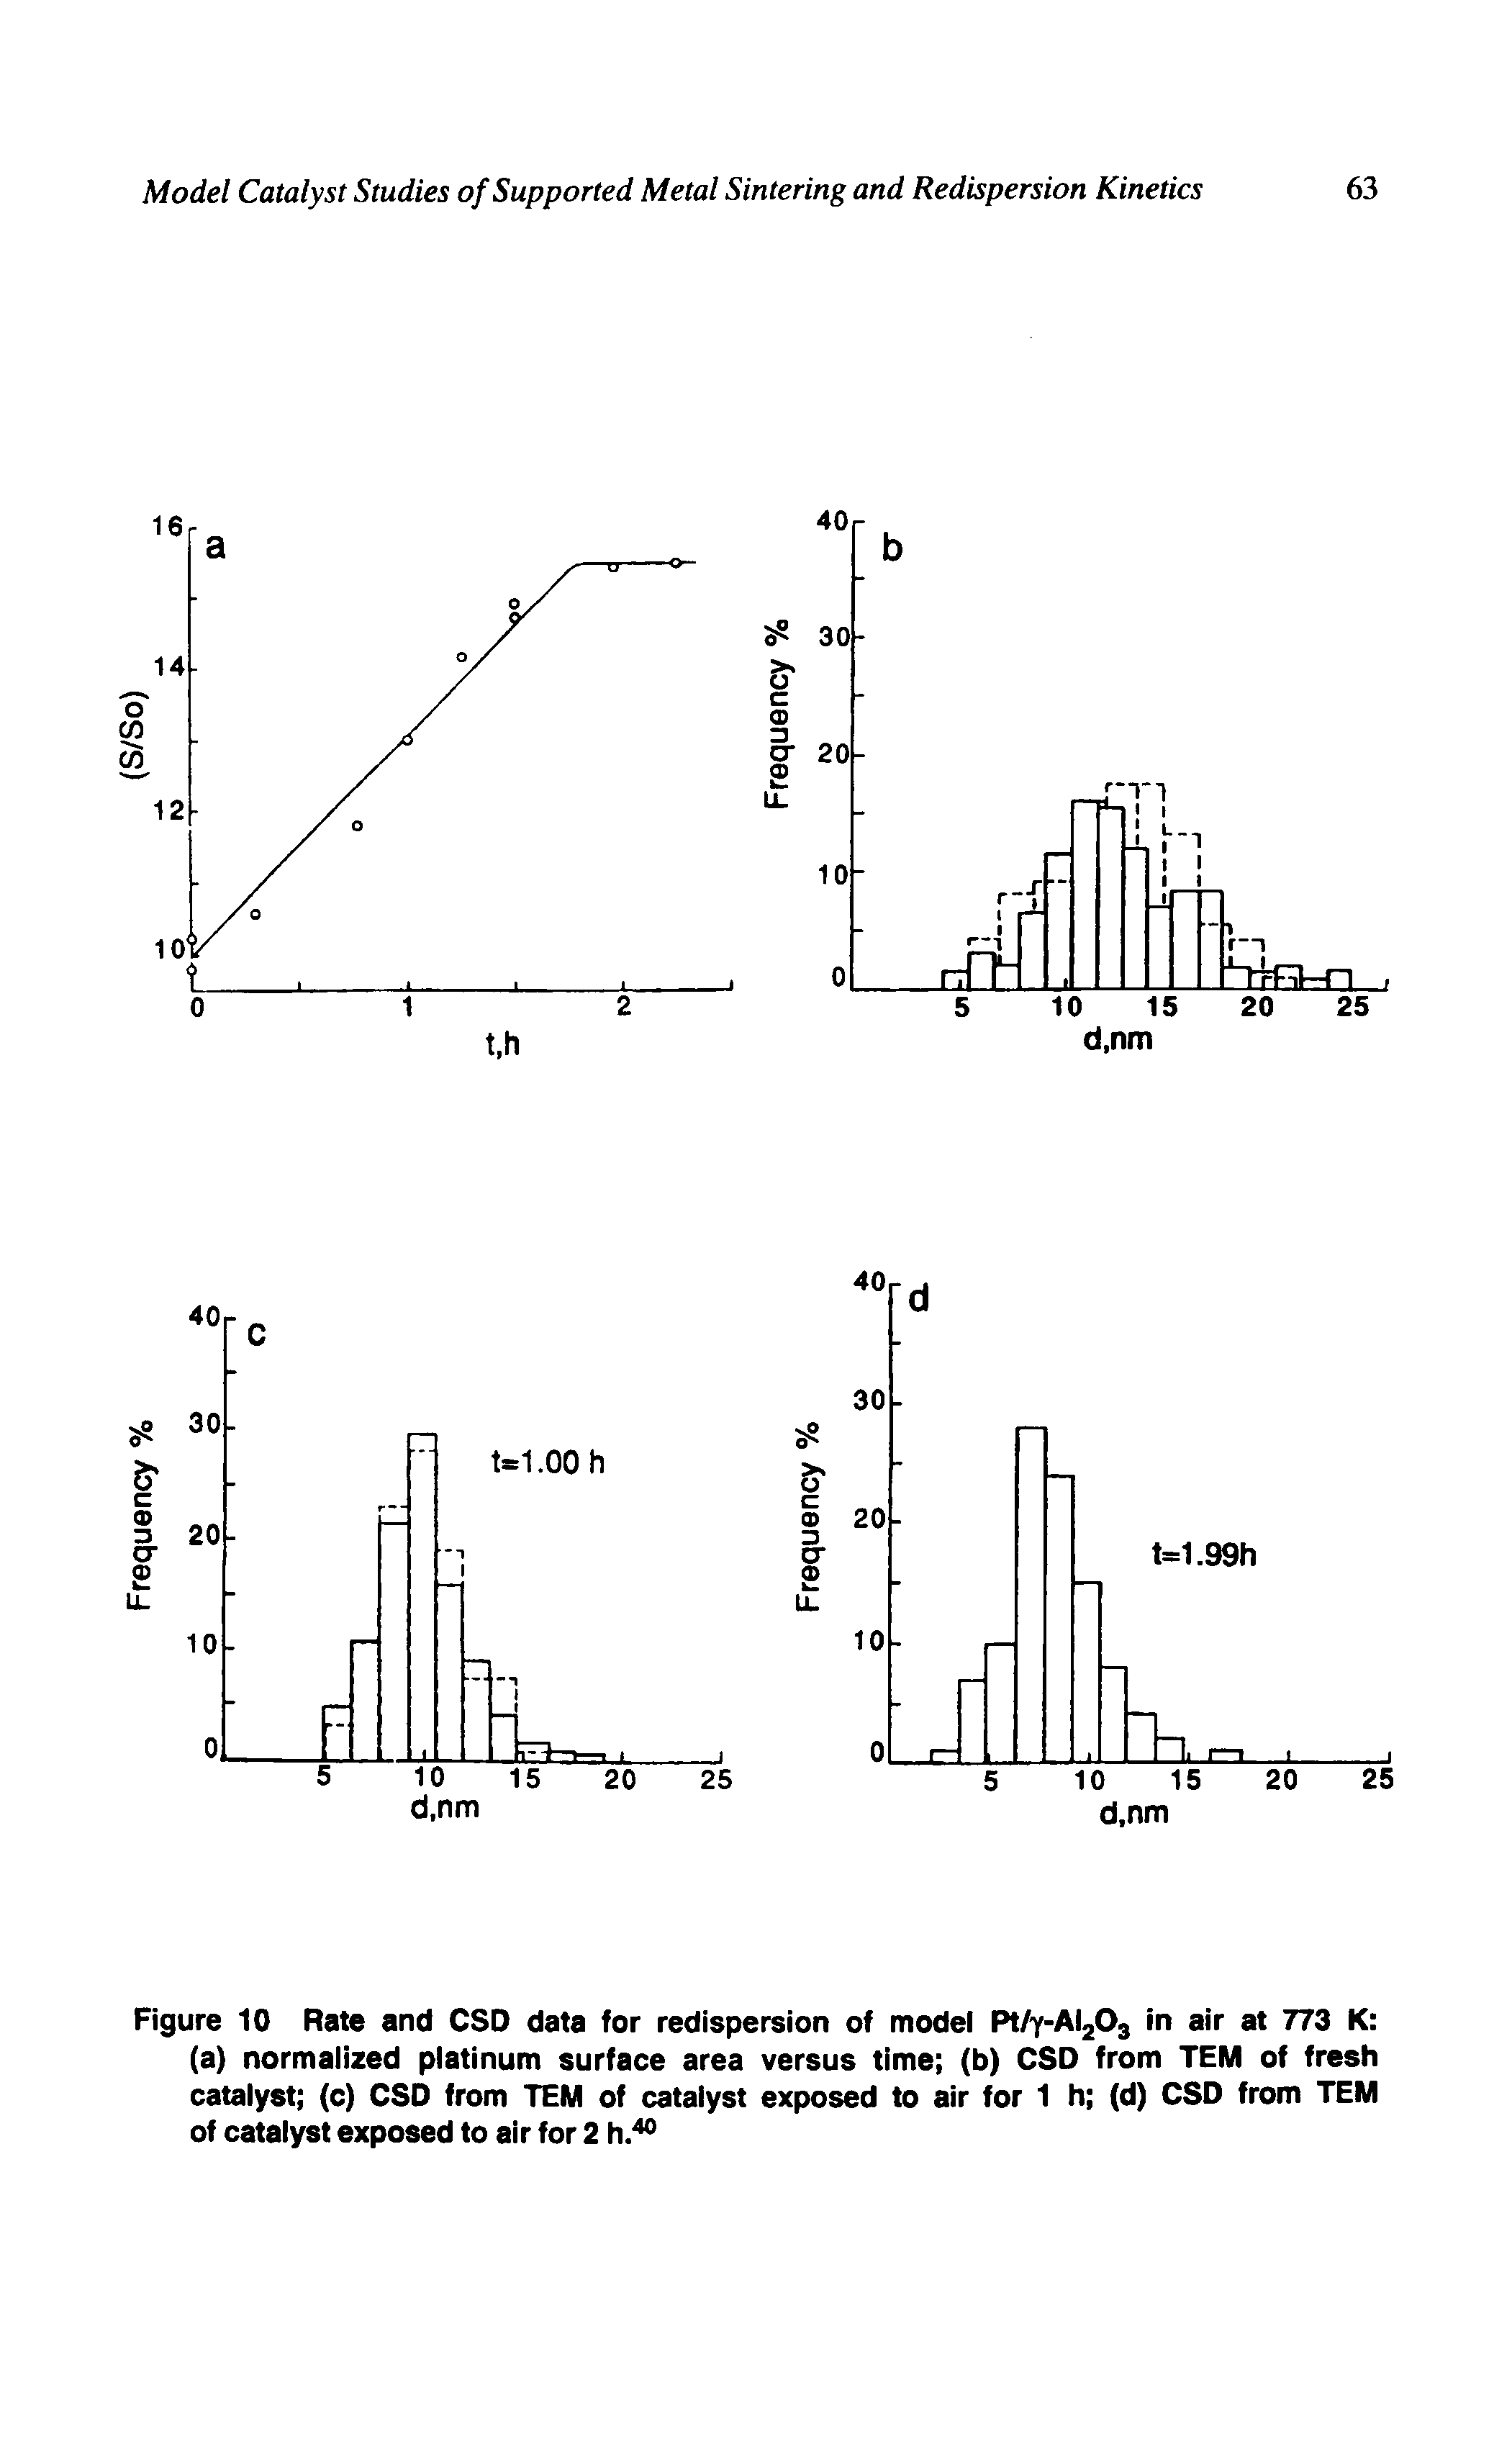 Figure 10 Rate and CSD data for redispersion of model R/Y-AI2O3 in air at 773 K (a) normalized platinum surface area versus time (b) CSD from TEM of fresh catalyst (c) CSD from TEM of catalyst exposed to air for 1 h (d) CSD from TEM of catalyst exposed to air for 2 h. ...